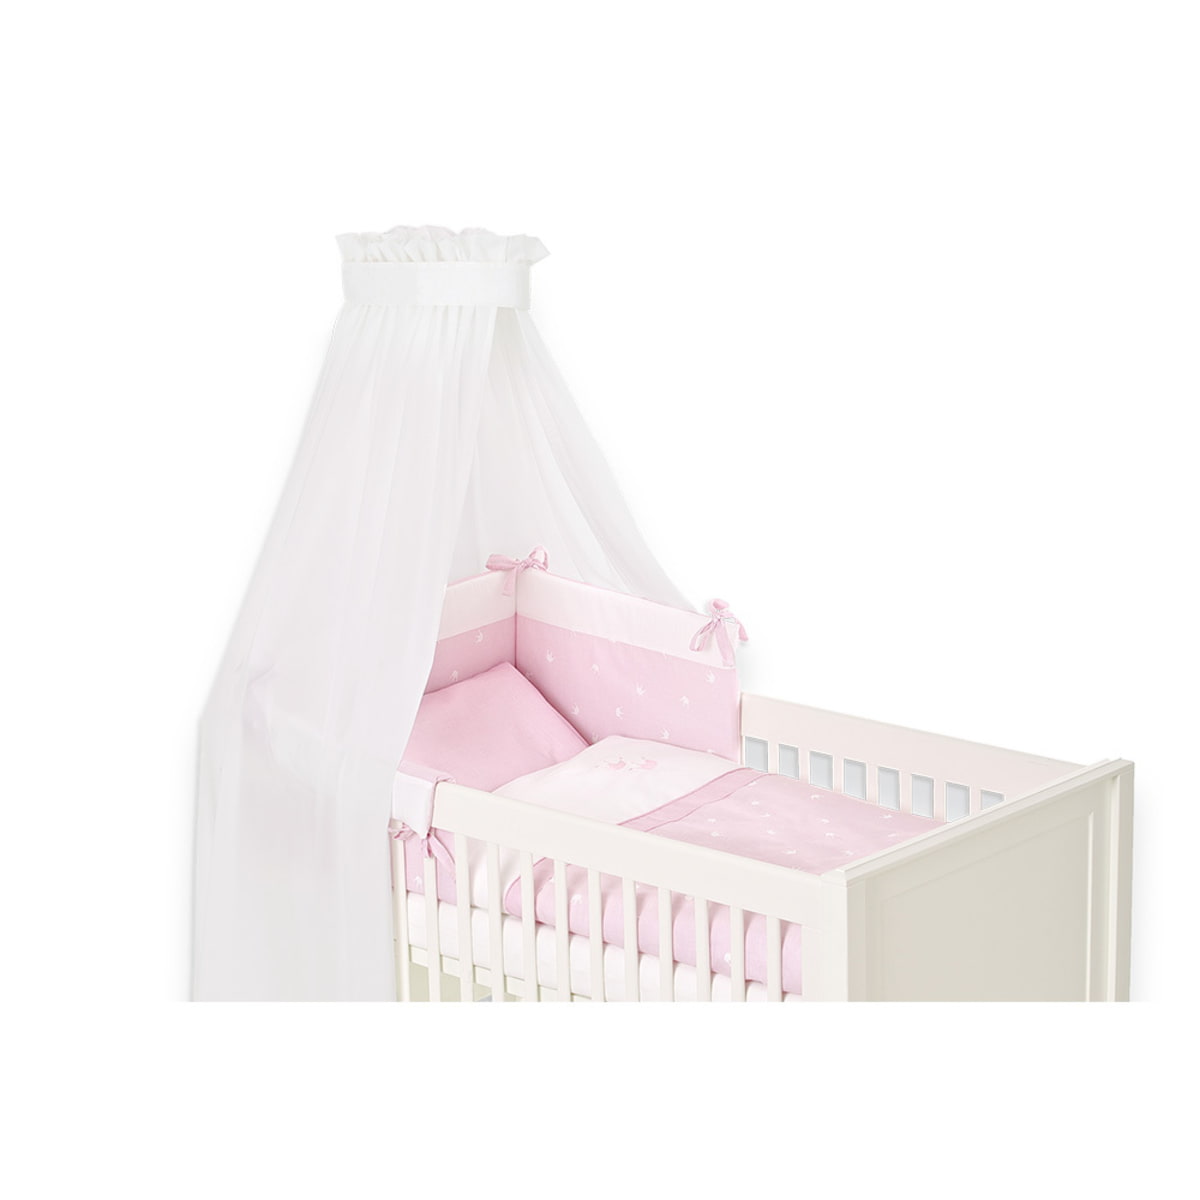 3-piece set consisting of bedding, bumper and drape in the design crown rose